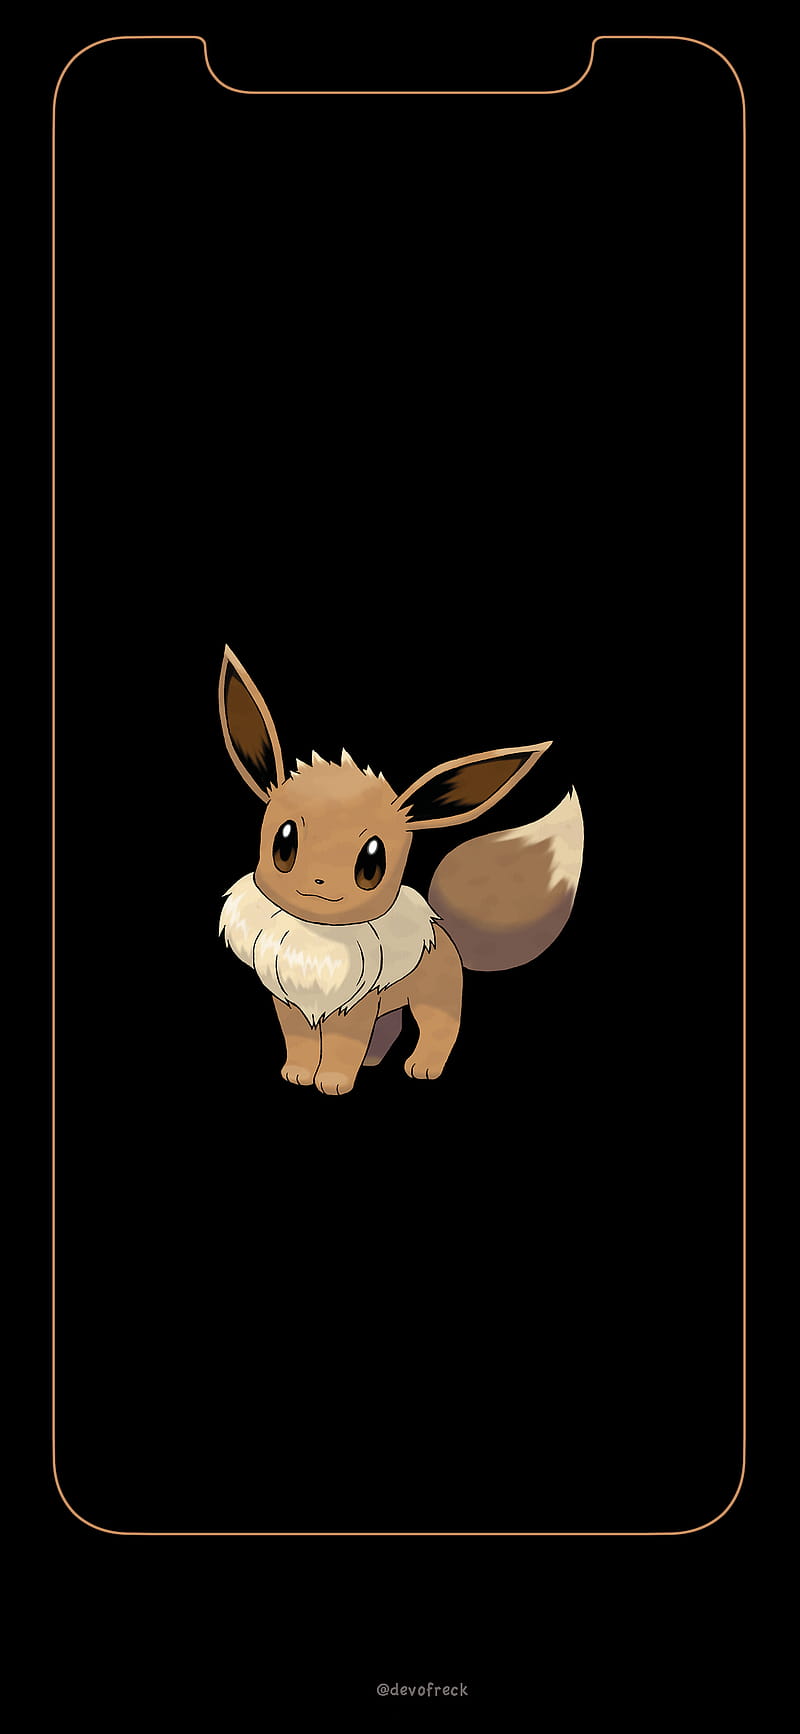 In Anticipation For Pokemon Let's Go Pikachu And Let's Go Eevee I Have Made IPhone X : R Iphone, Eevee Dark, HD phone wallpaper